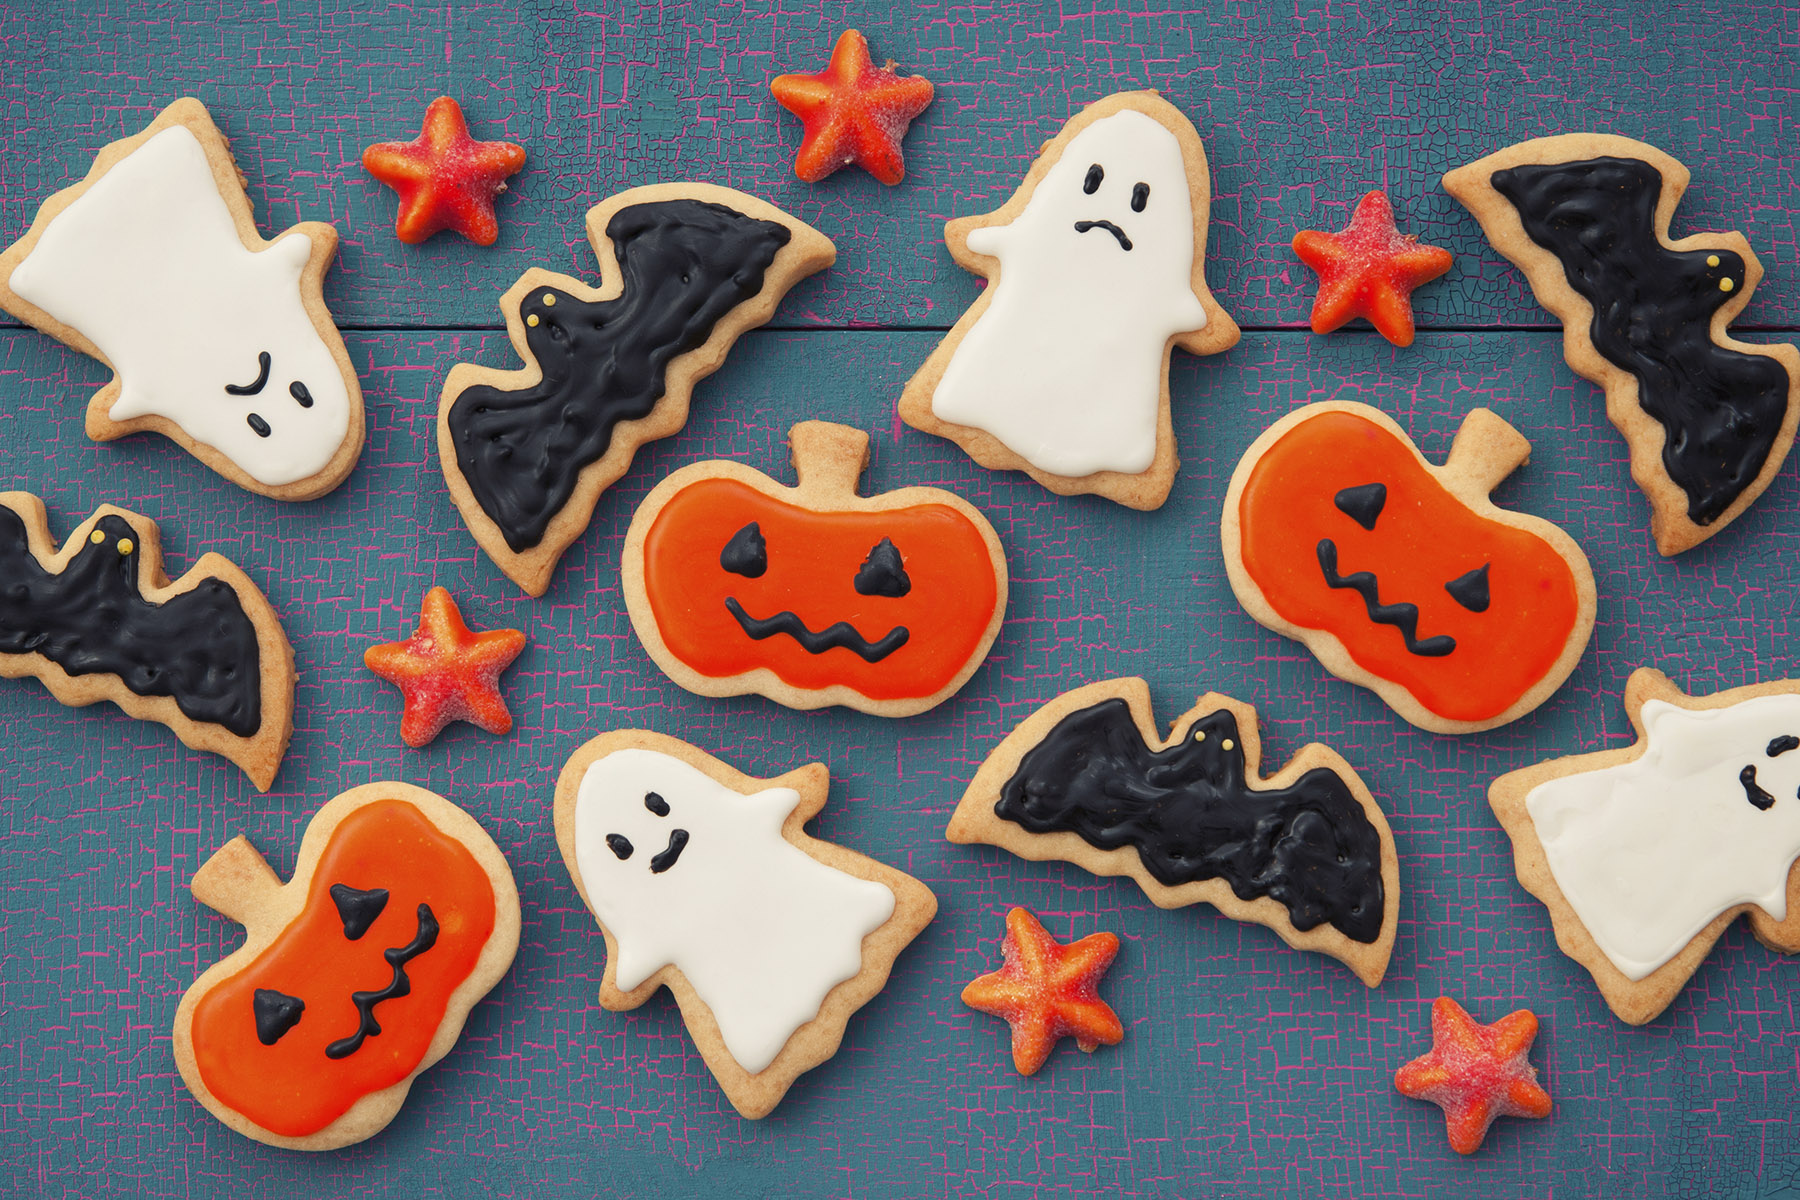 A picture of iced Halloween-themed biscuits on a blue background. There are ghost, bast, pumpkin and star biscuits